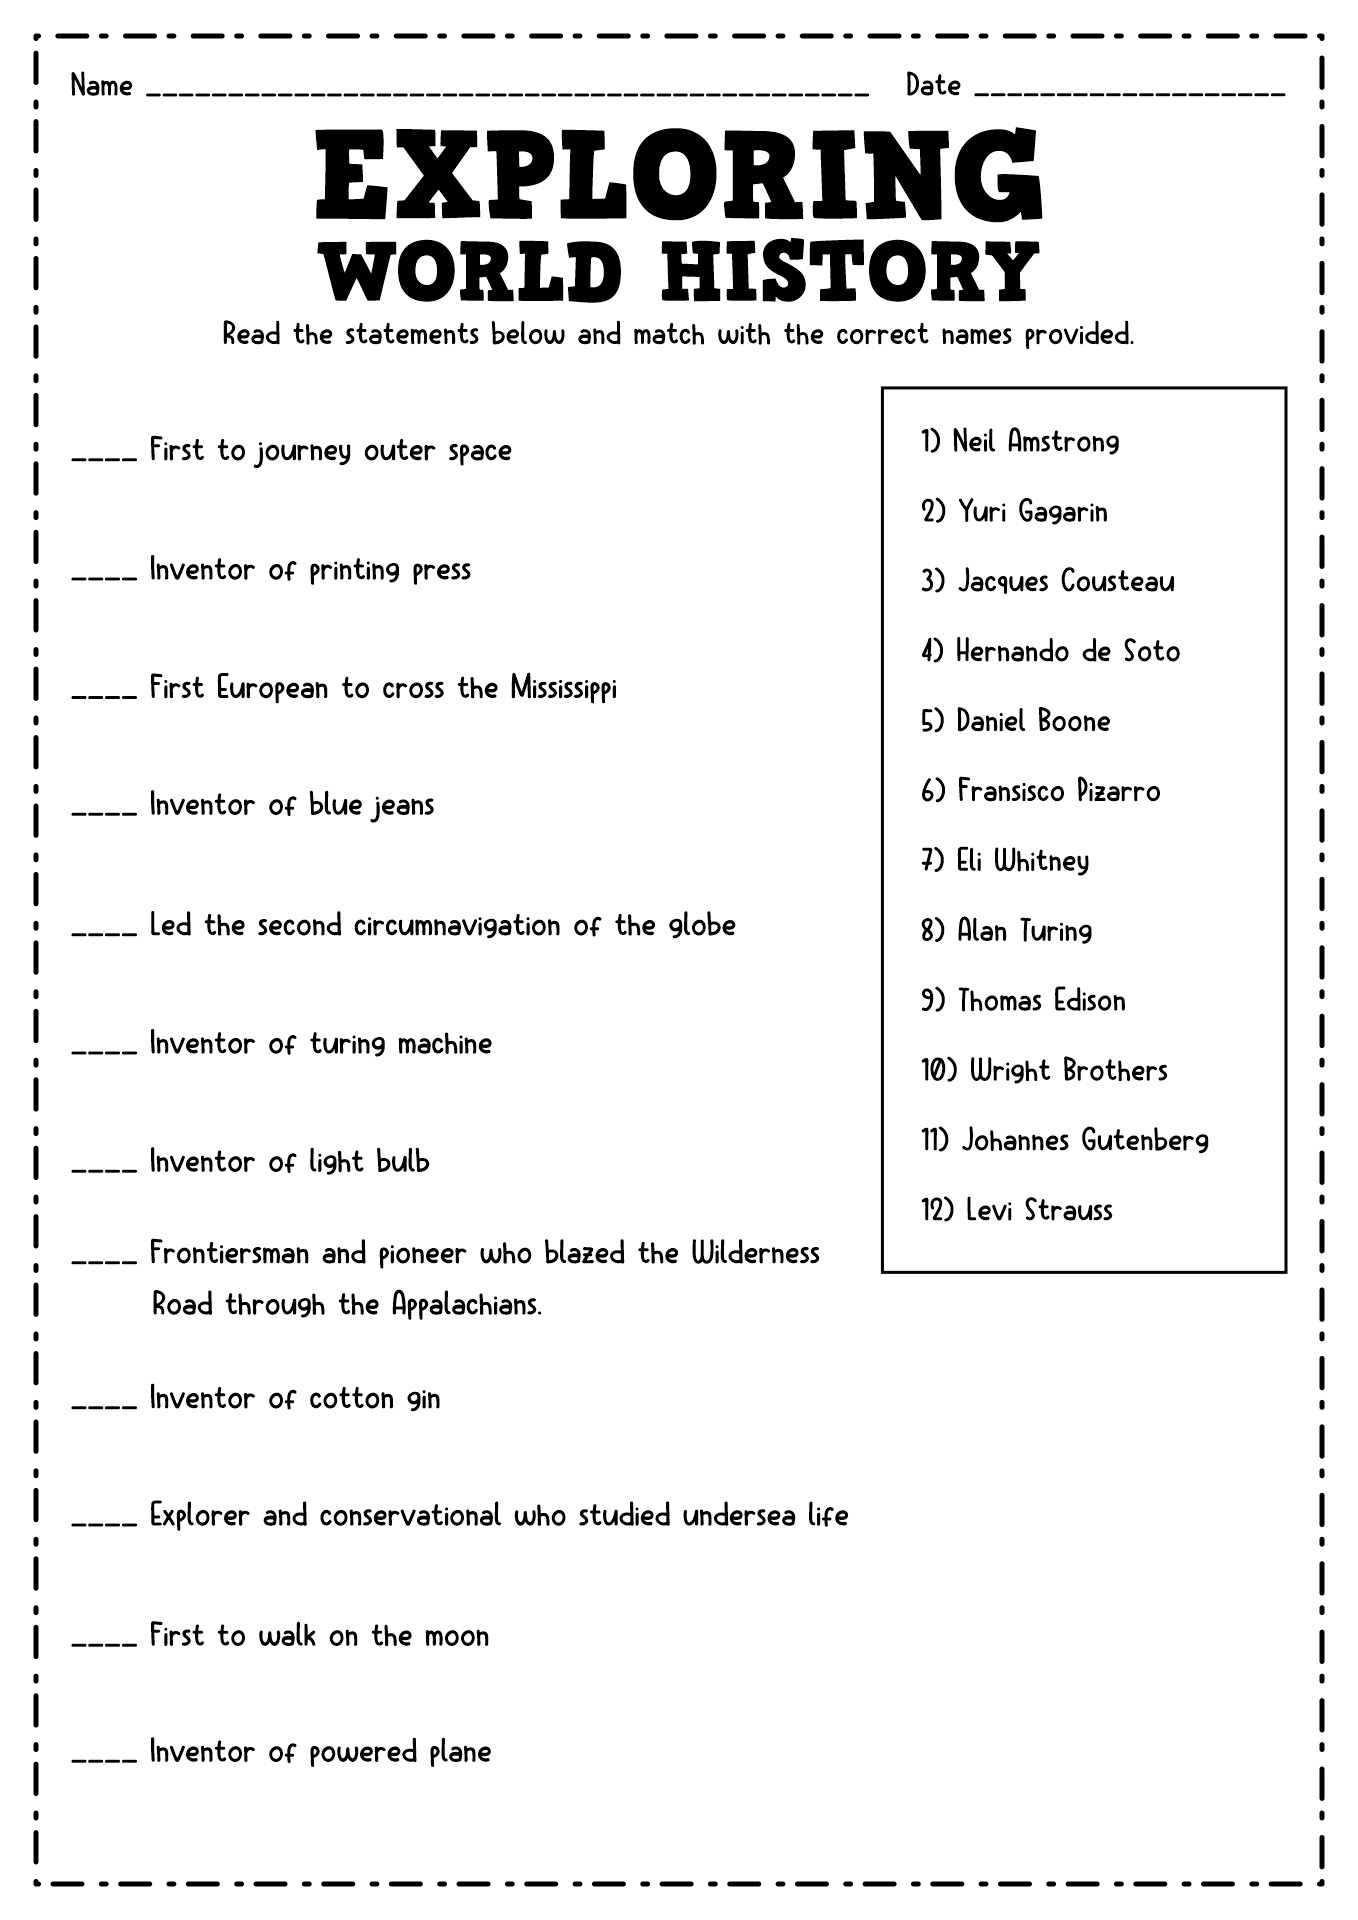 7-best-images-of-free-printable-history-worksheets-texas-history